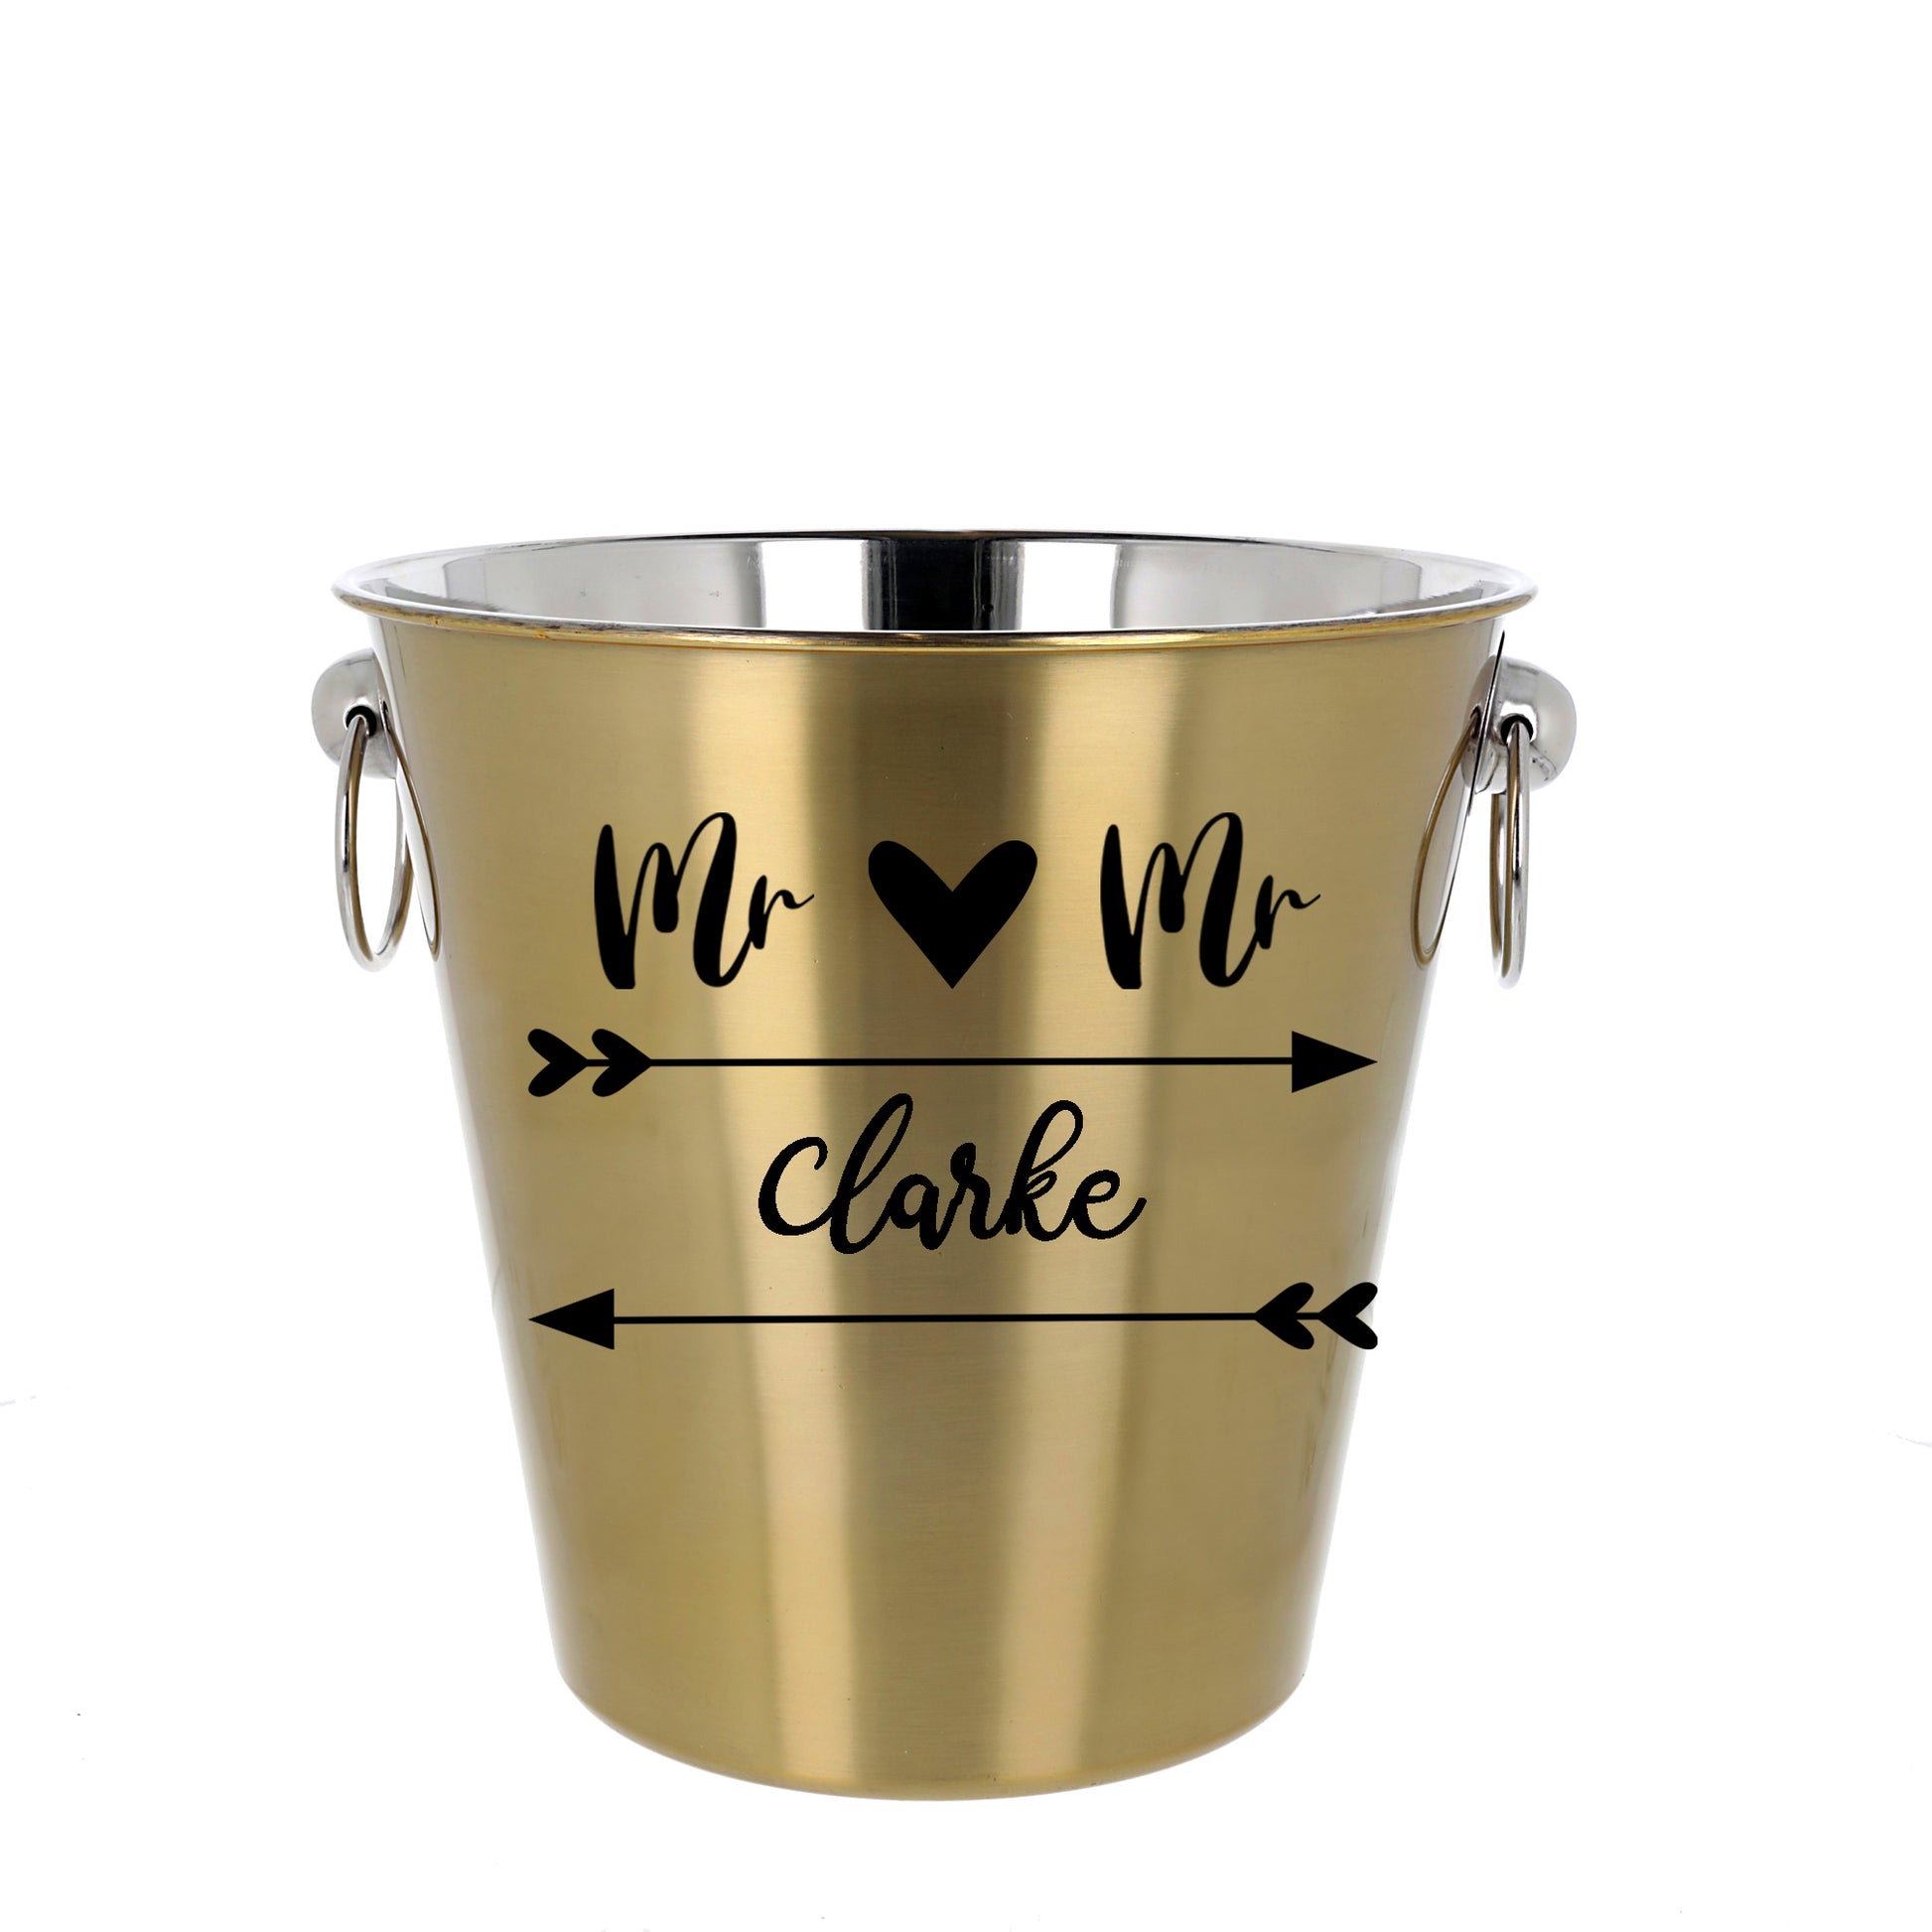 Personalised Wedding Gold Ice Bucket With matching Champagne Glasses  - Always Looking Good - Ice Bucket Only  